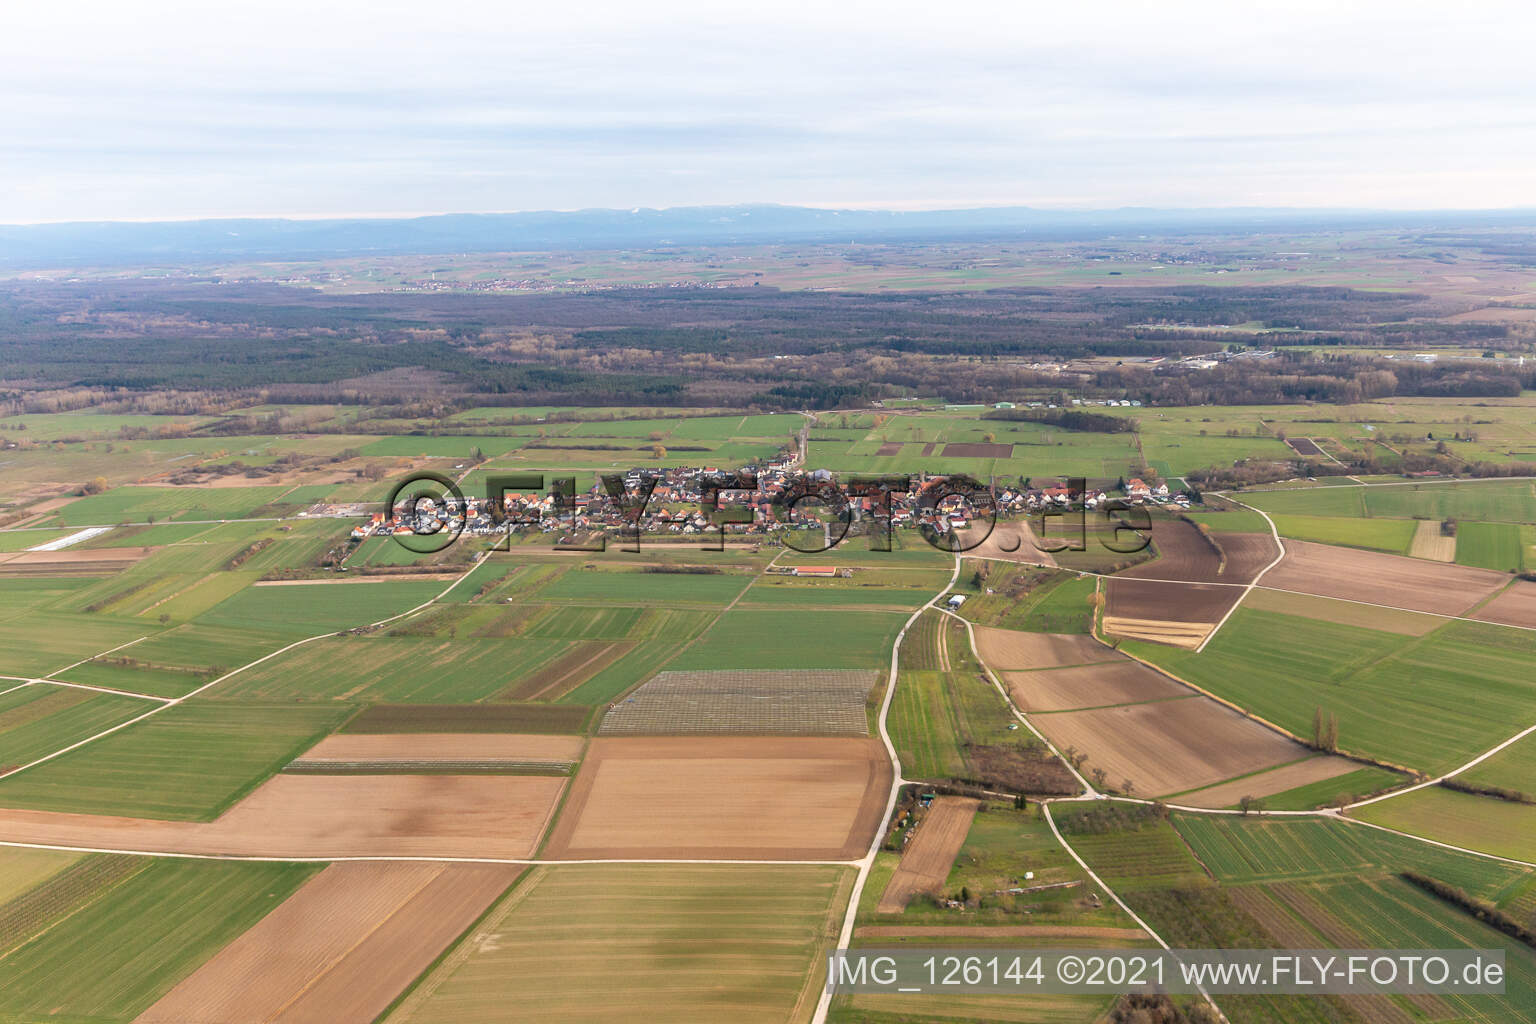 Drone recording of Schweighofen in the state Rhineland-Palatinate, Germany